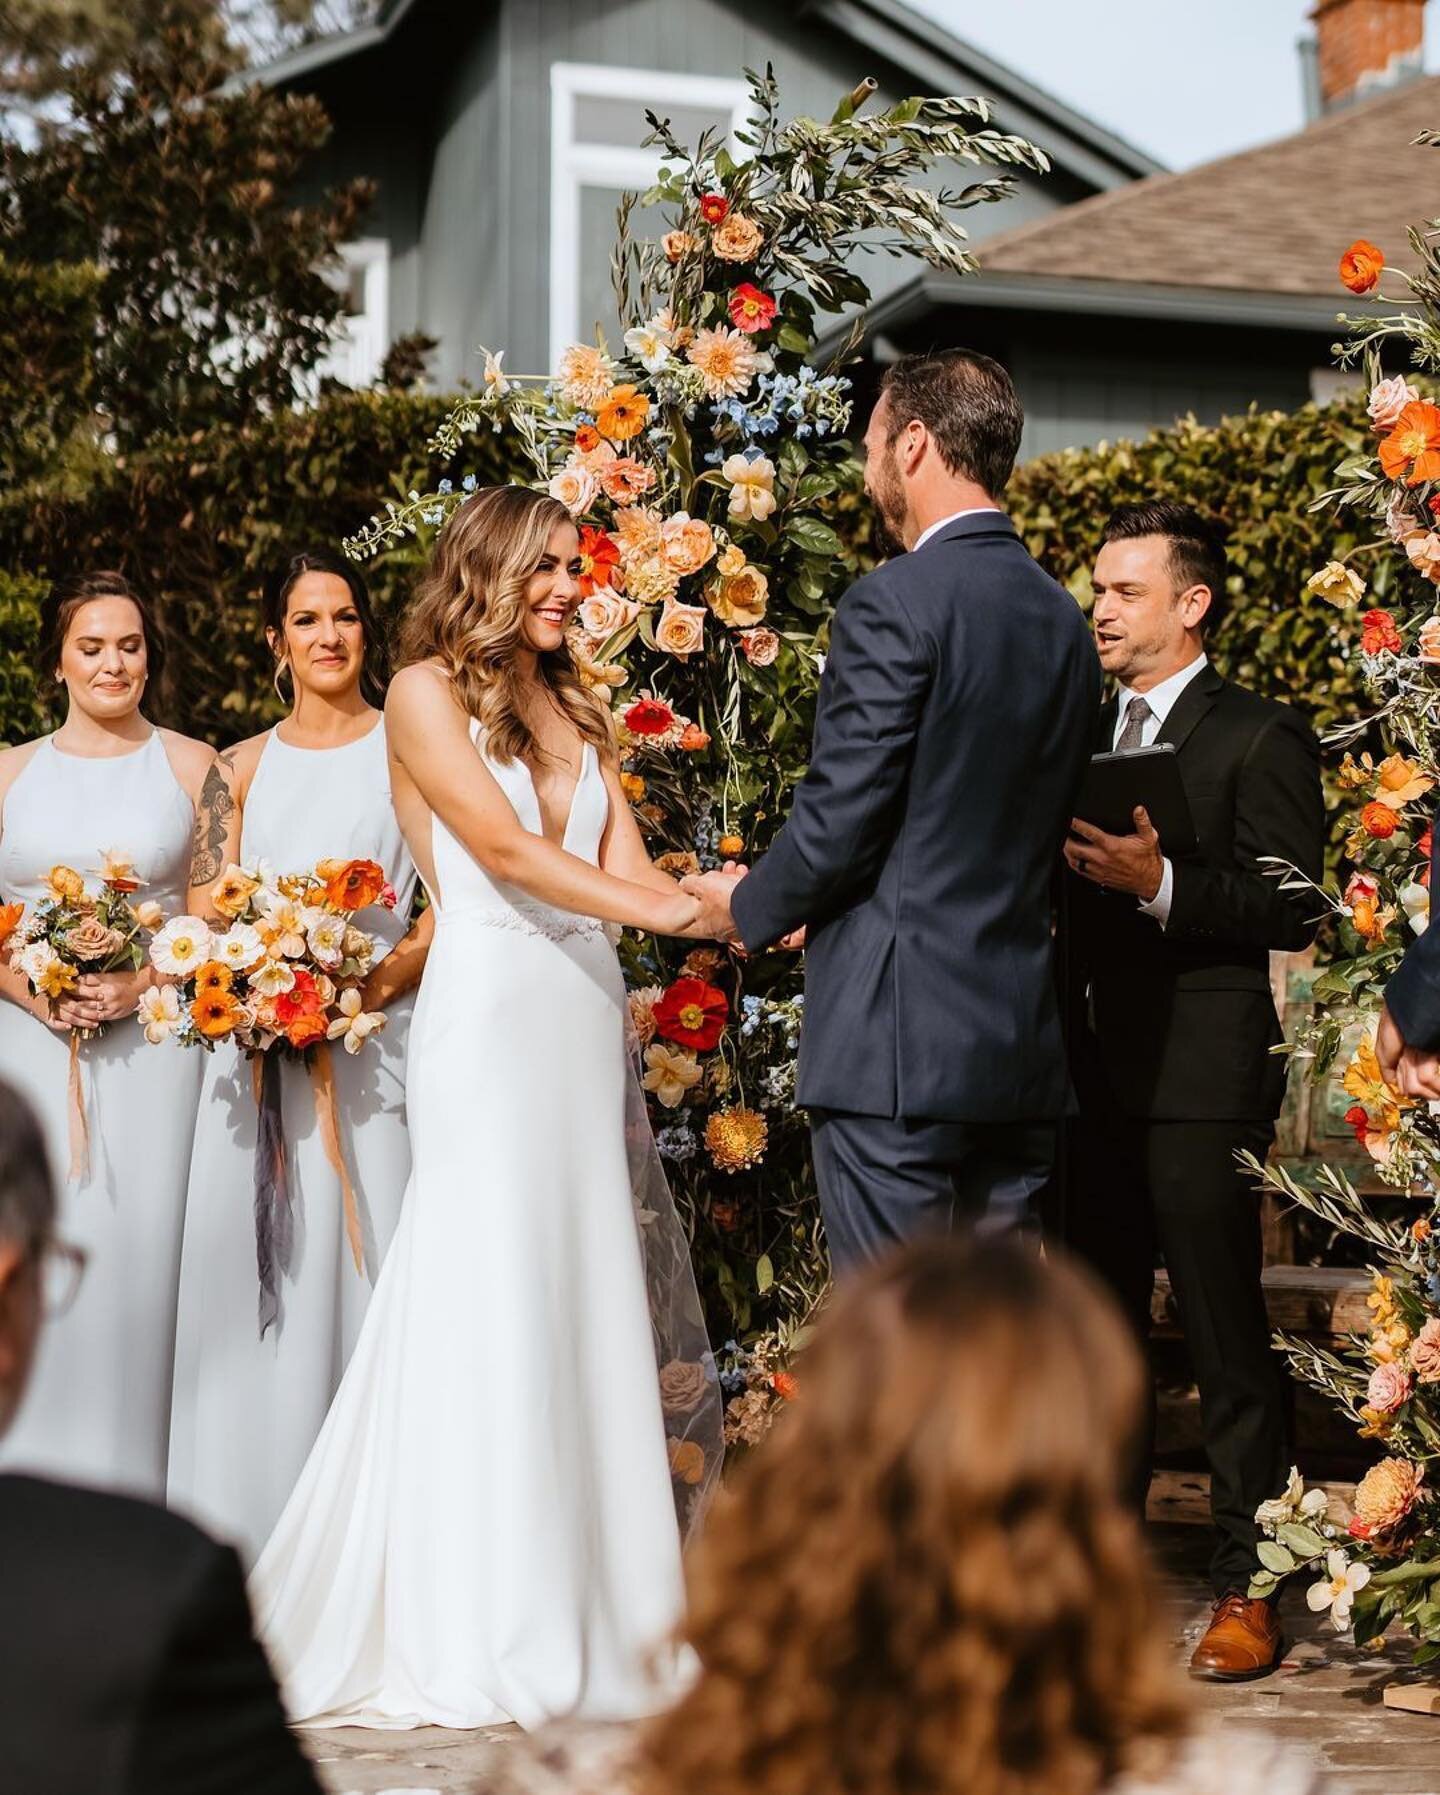 Congratulations to Allison and Aaron who tied the knot yesterday in our gardens with a dream team of vendors!
&bull;
Photography: @laurieashleyphotography 
Coordinating: @alwaysflawlessproductions
Venue: @villafrancescaevents
Video: @leavesoftimbre
F